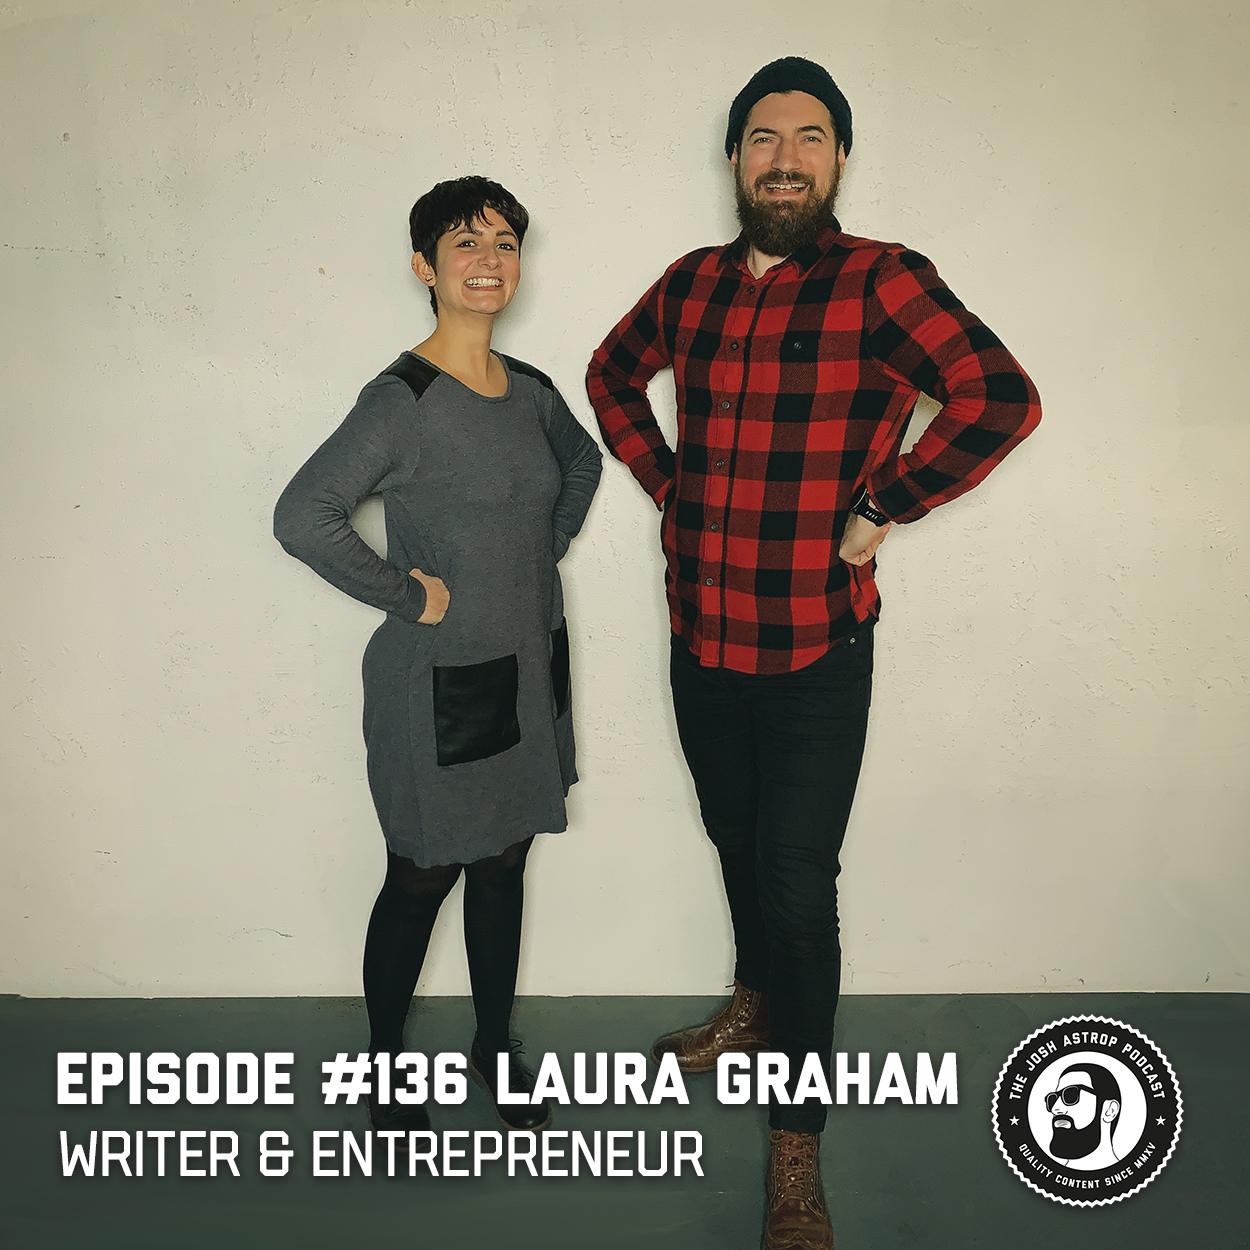 #136 Laura Graham - We talk brains, promotion and stacking cash